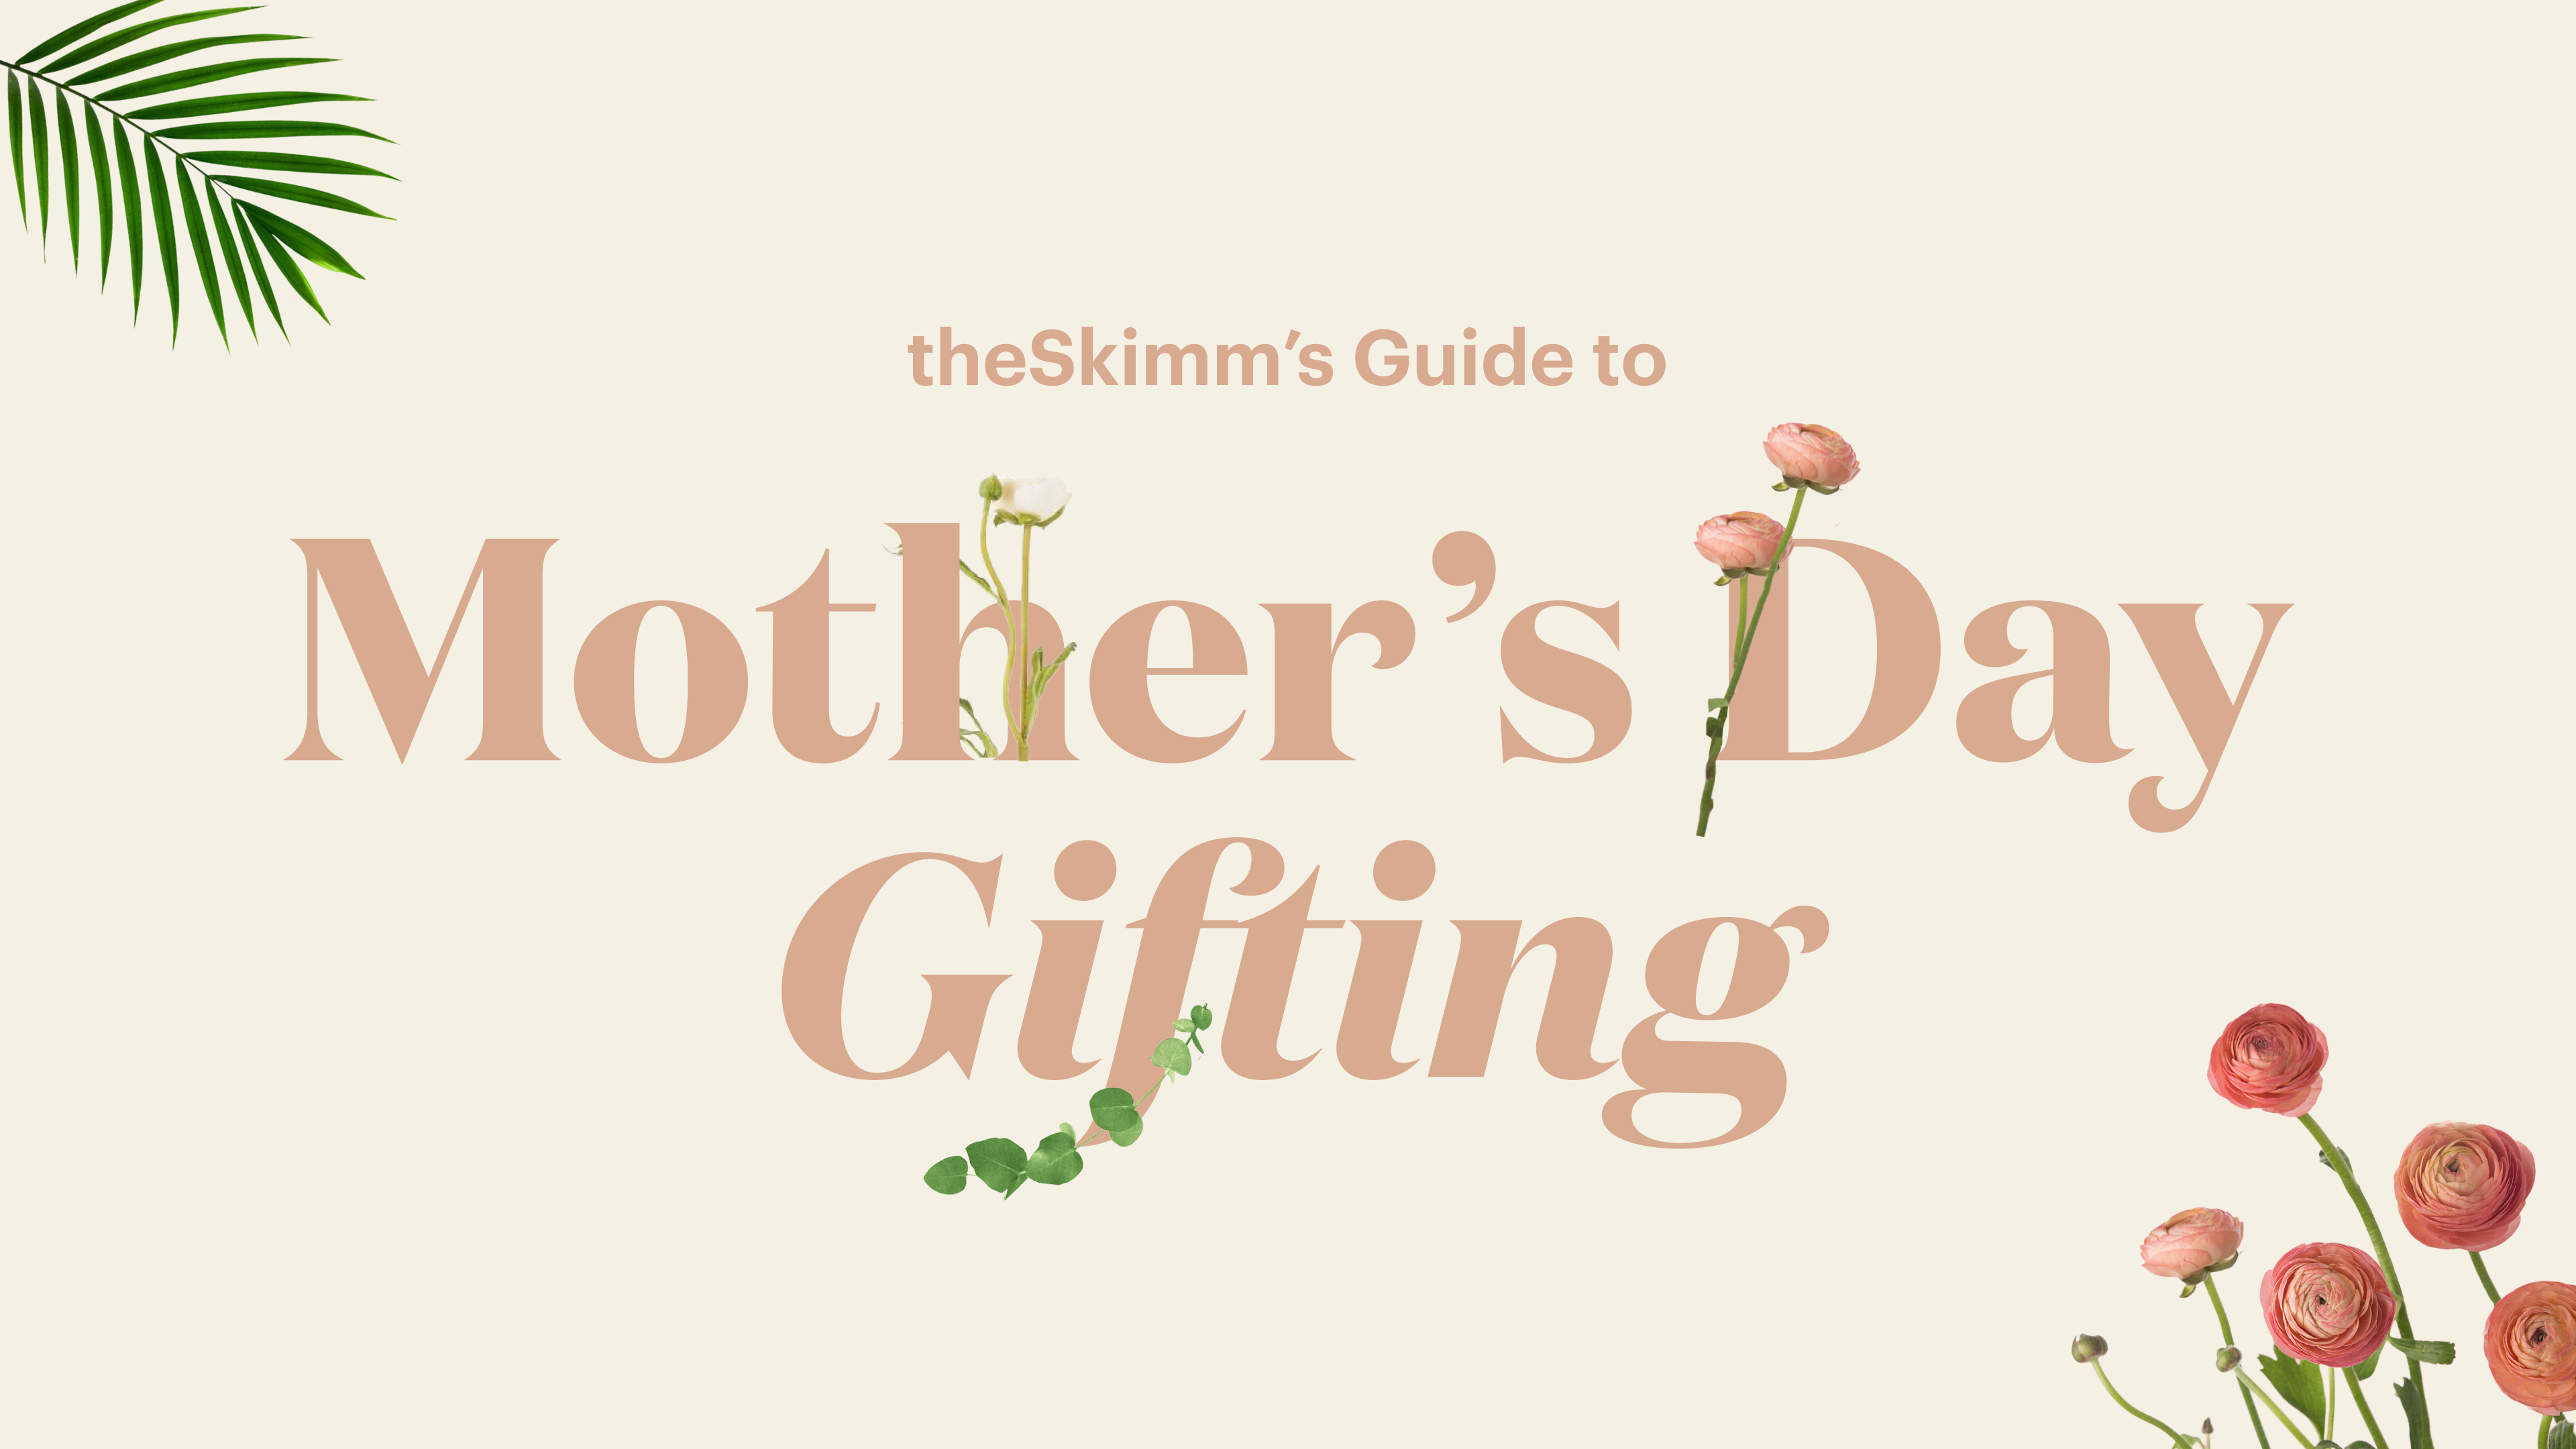 Mother's Day Gift Guide – Just Posted